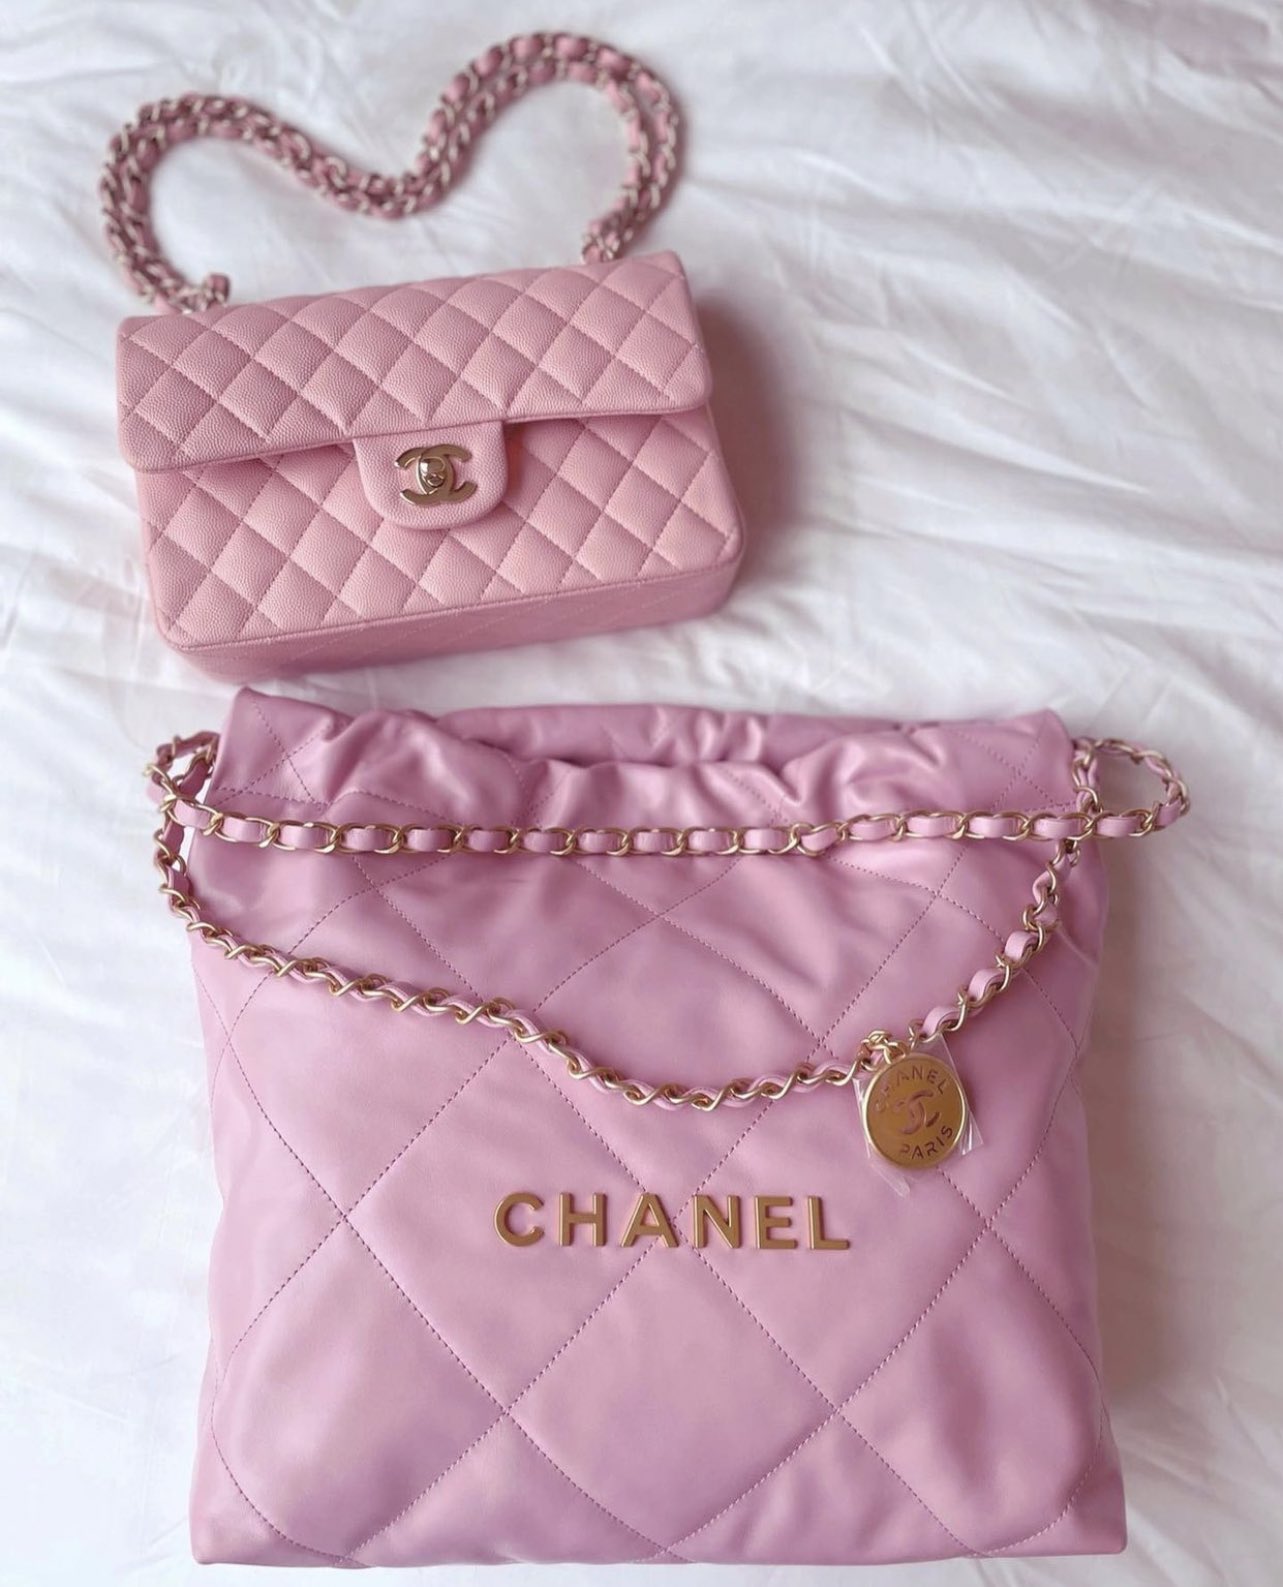 Cute Pink Chanel Bag Pictures, Photos, and Images for Facebook, Tumblr,  Pinterest, and Twitter